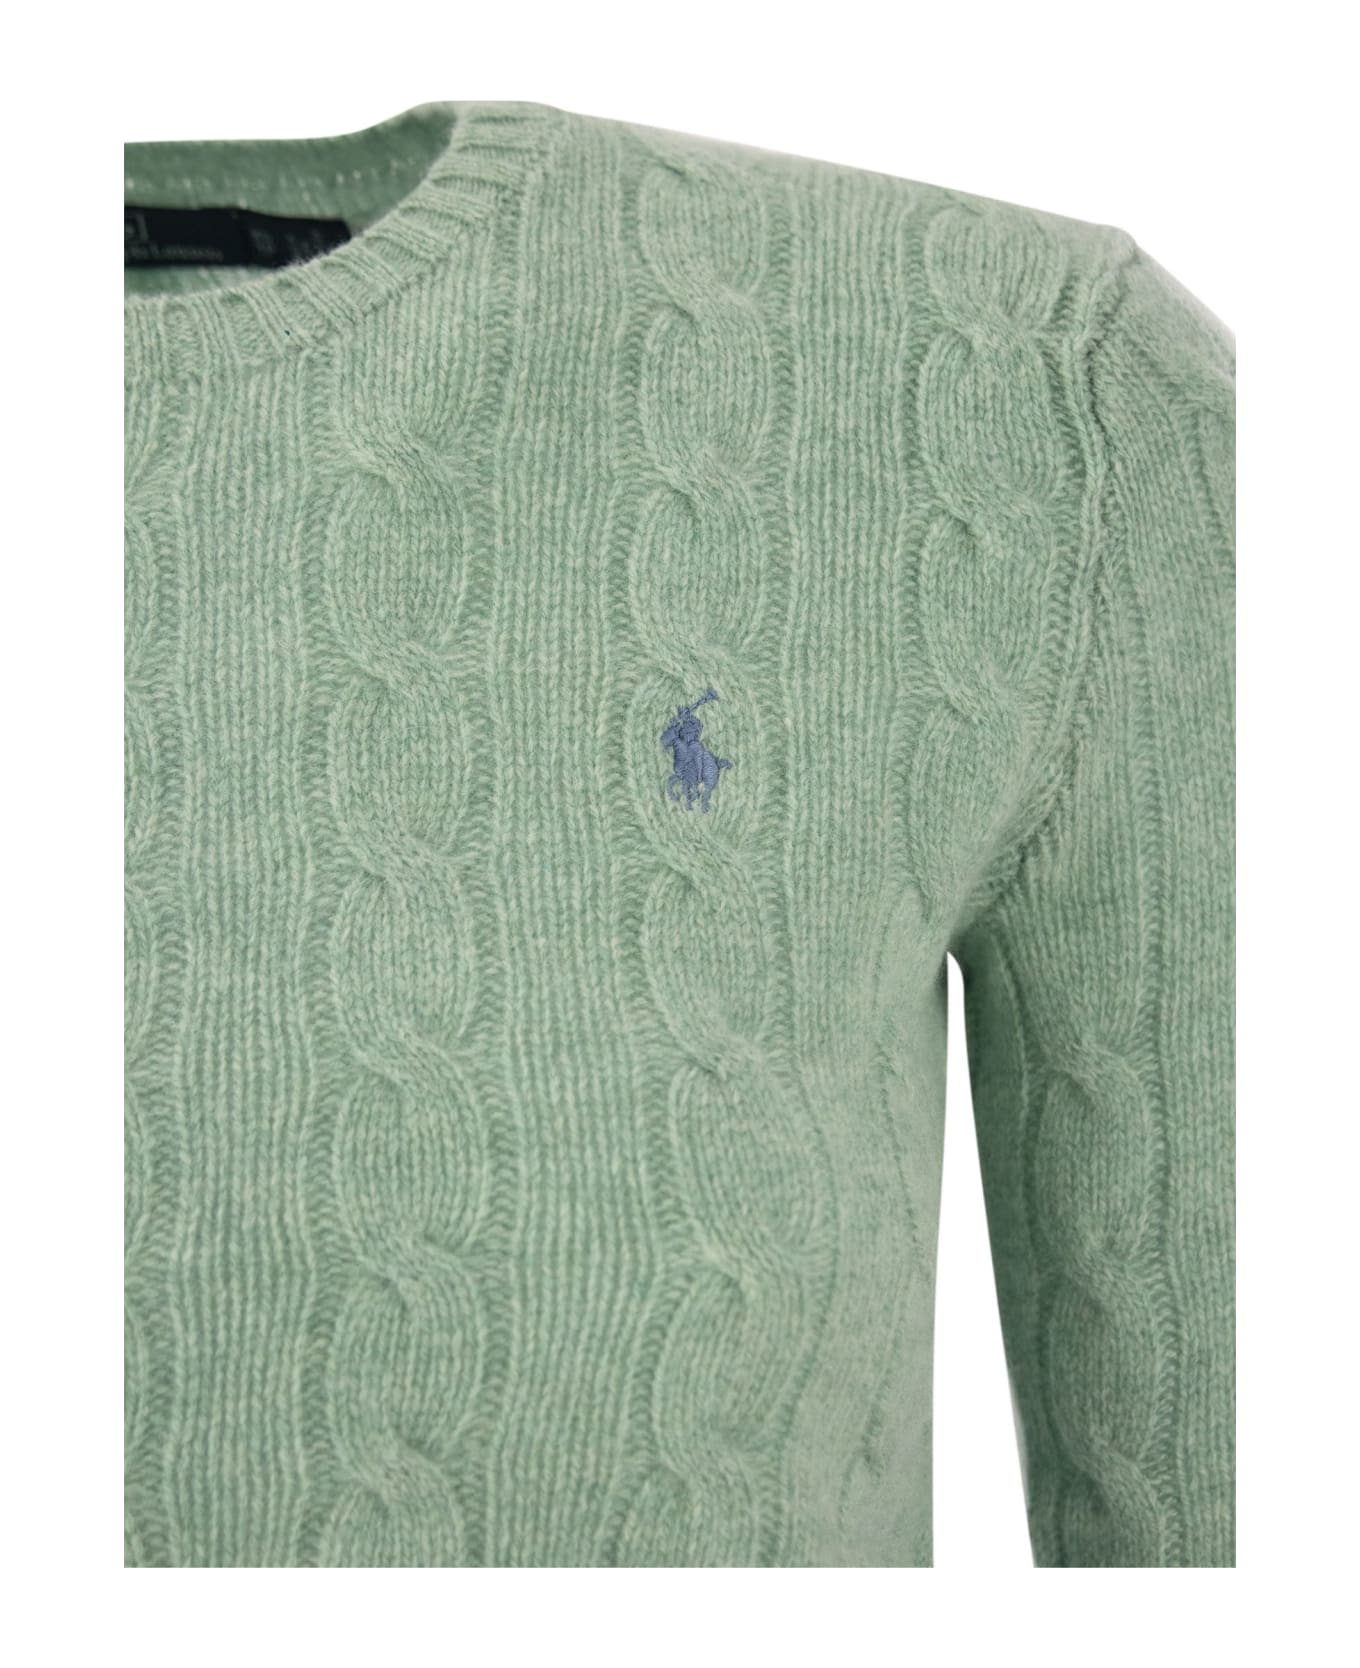 Polo Ralph Lauren April Melange Green Wool And Cashmere Braided Sweater - Green